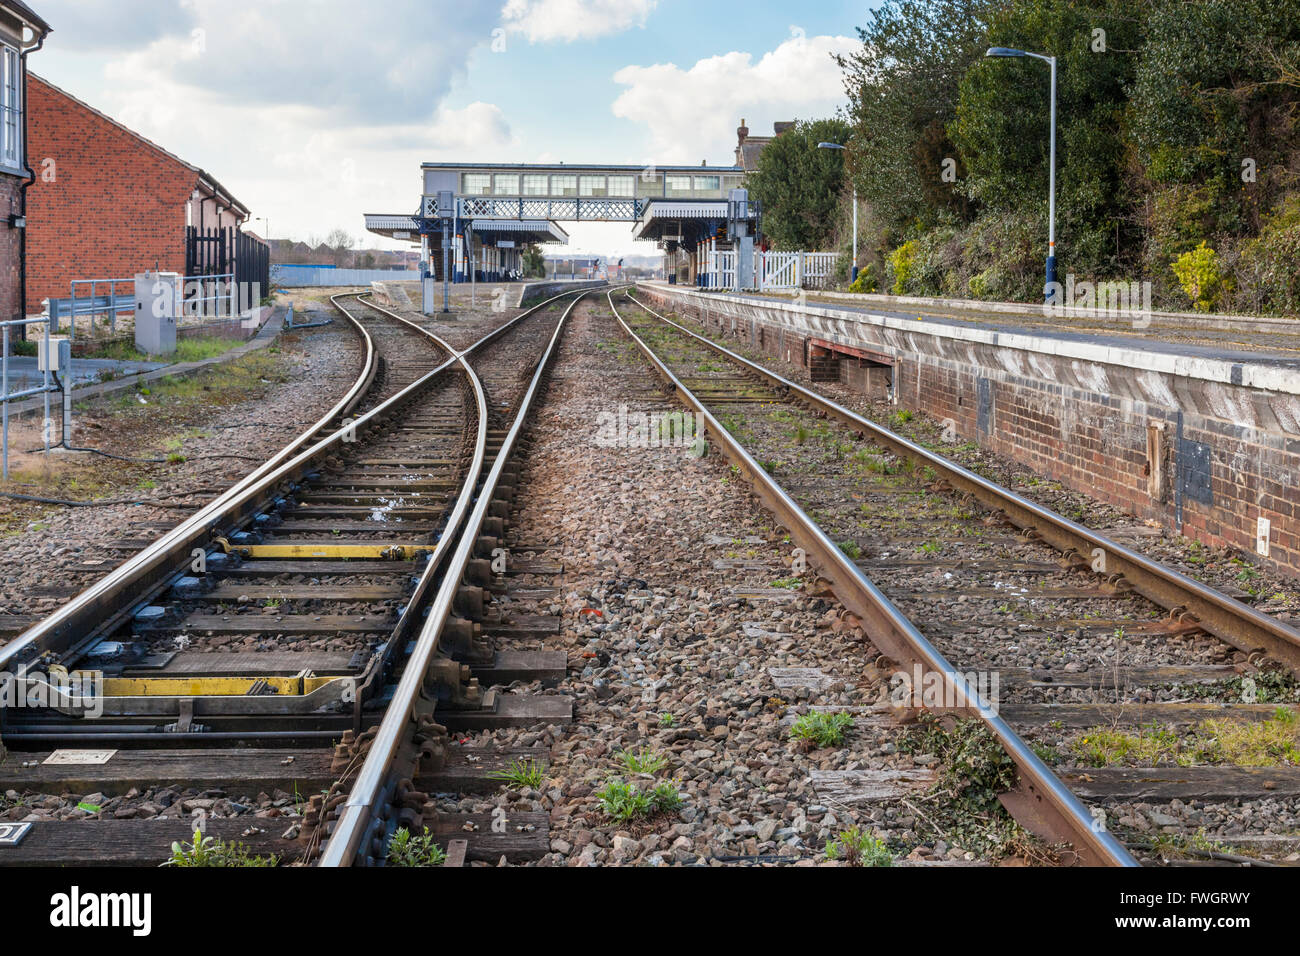 Railway tracks with points or switching on the approach to Sleaford Railway Station, Sleaford, Lincolnshire, England, UK Stock Photo